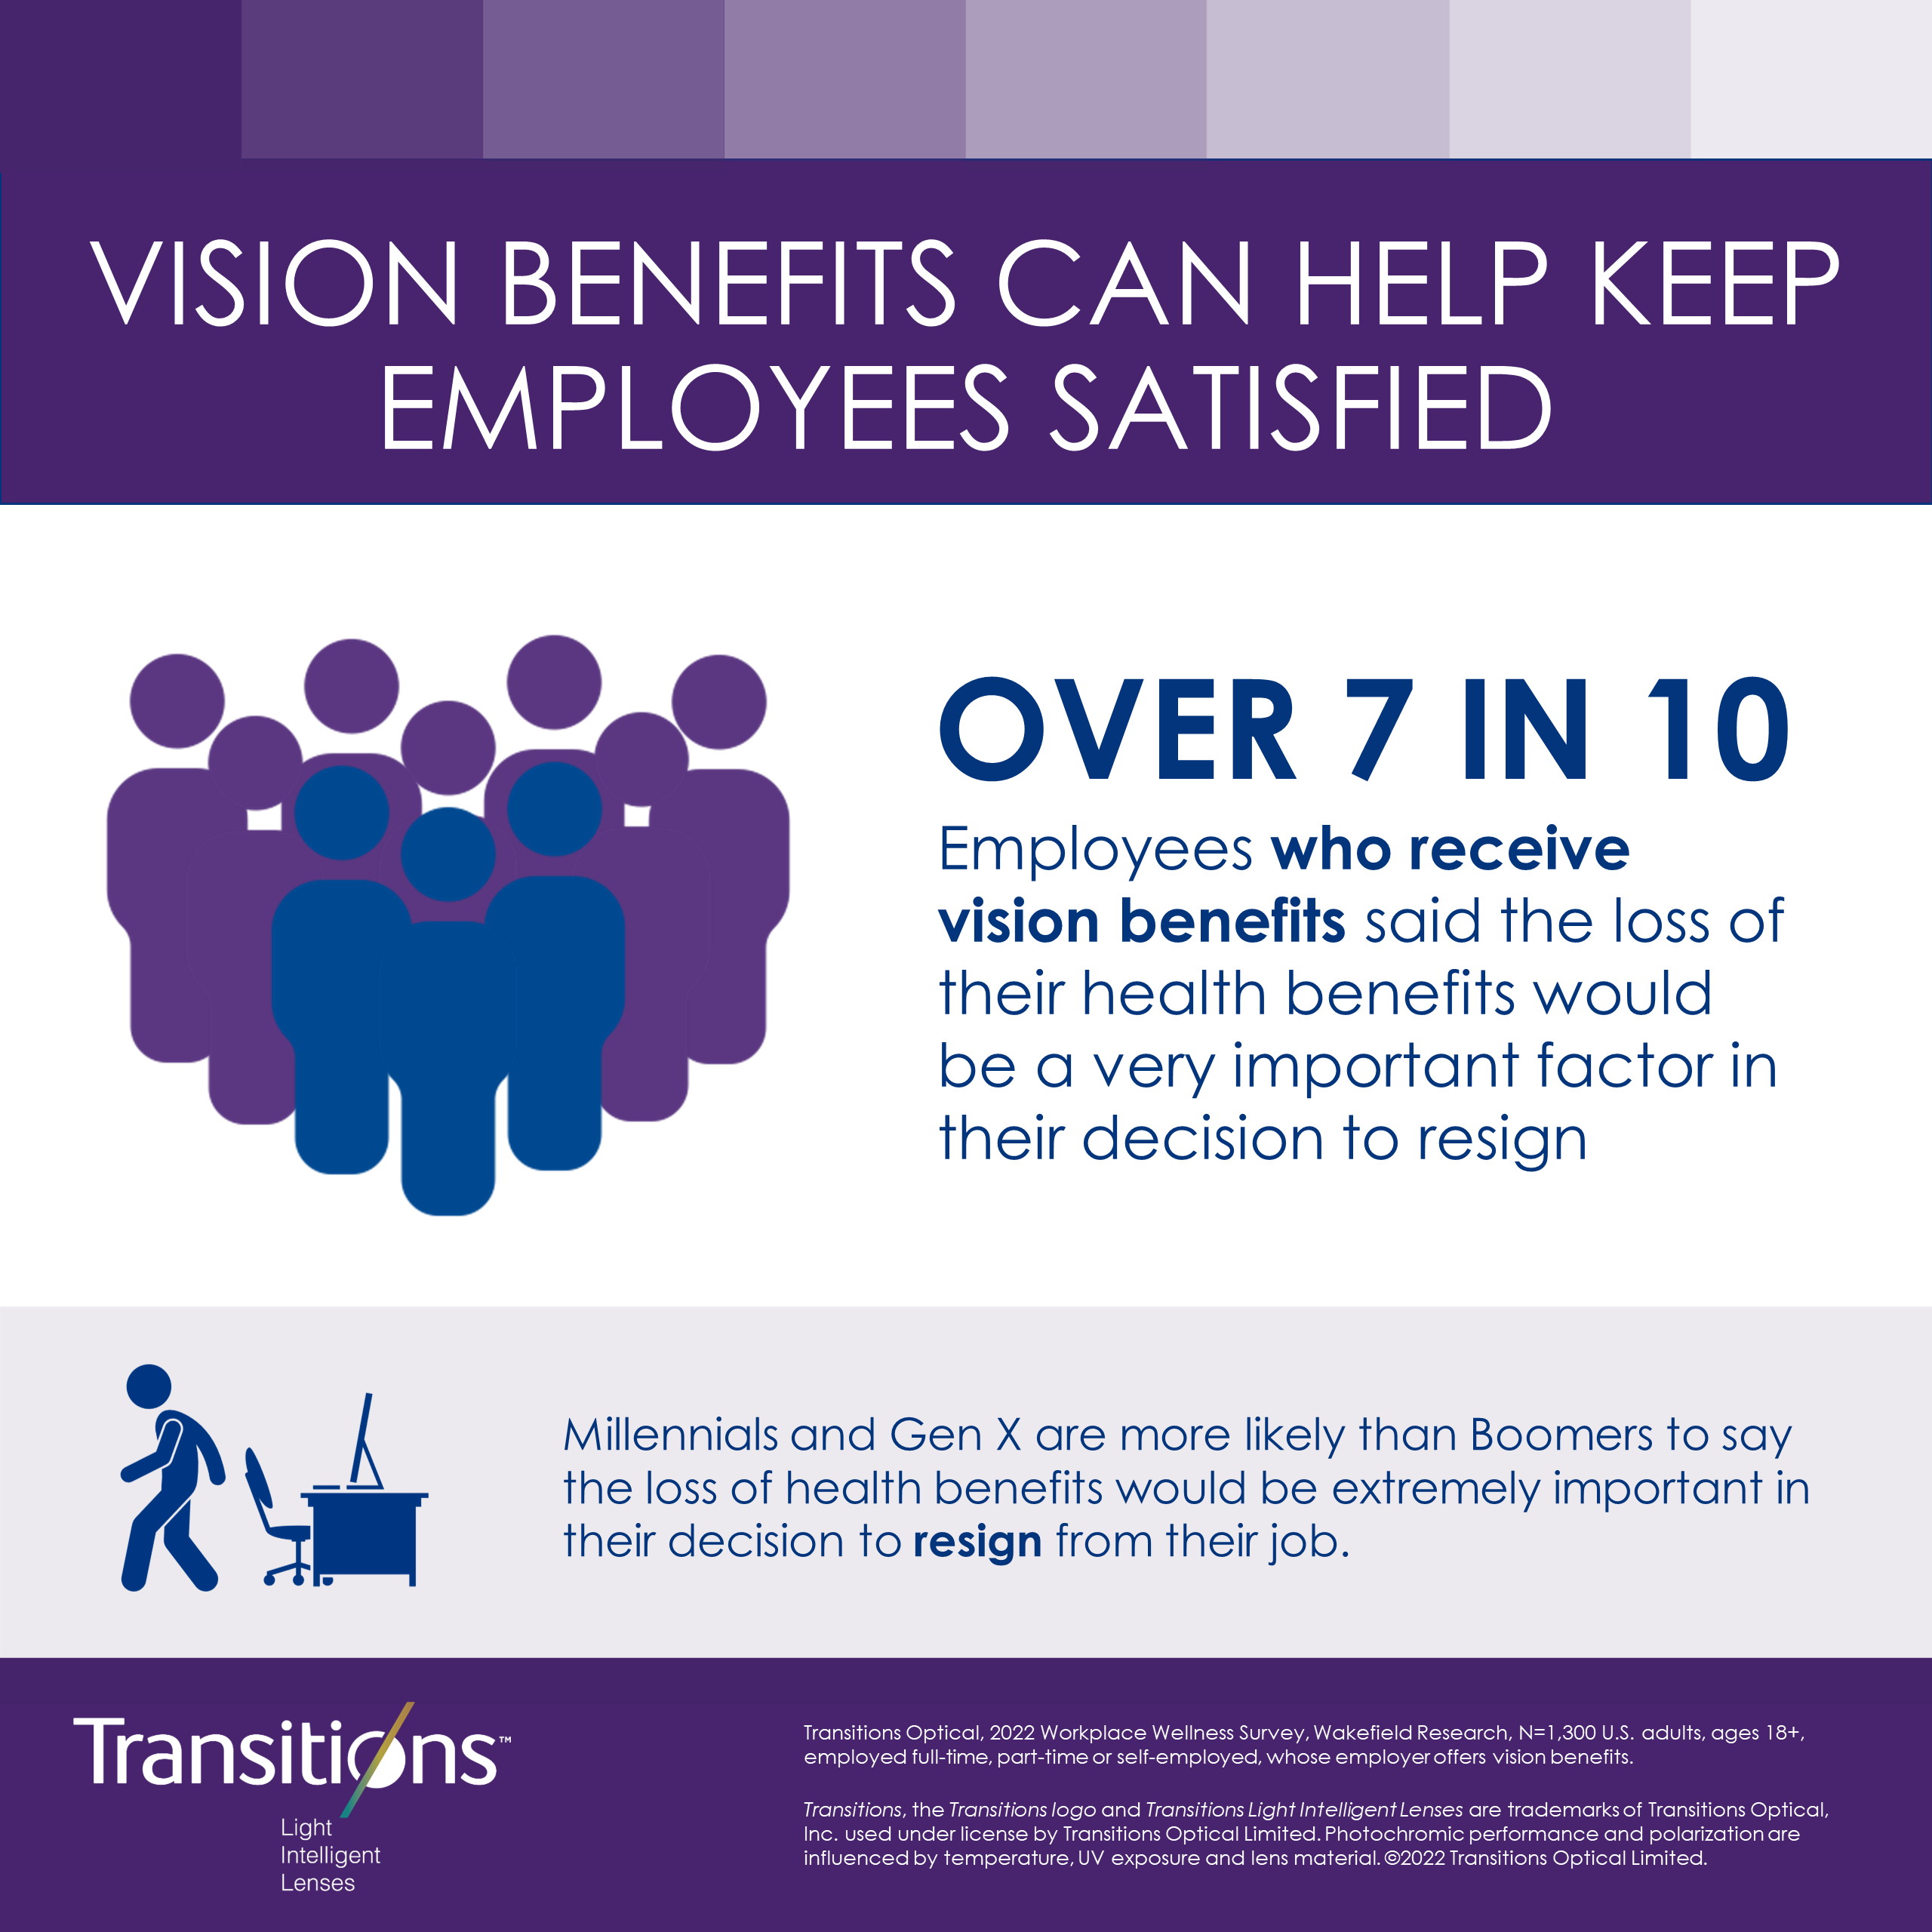 Vision Benefits can Help Keep Employees Satisfied